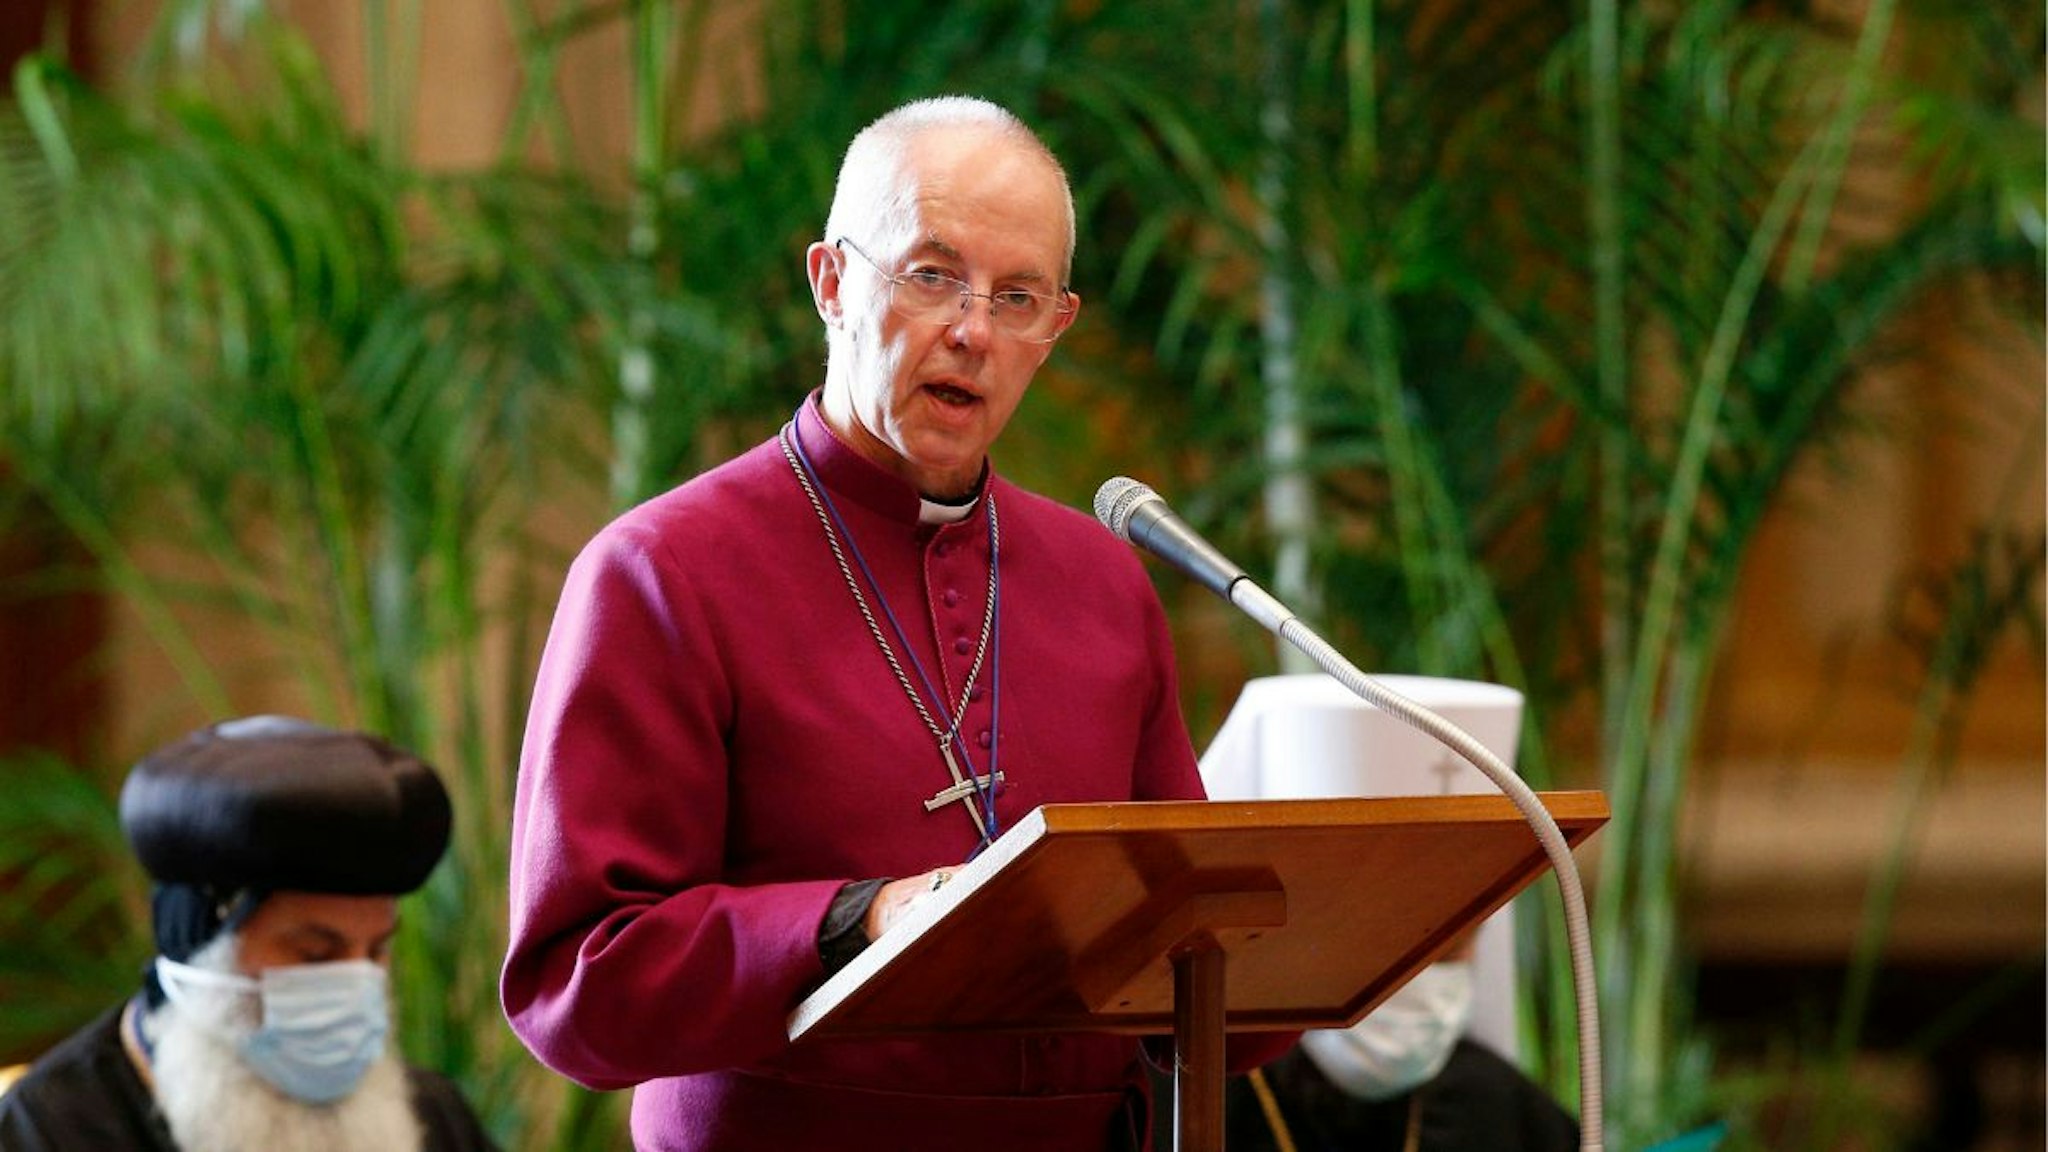 Anglican Archbishop Justin Welby of Canterbury addresses the meeting, “Faith and Science: Towards COP26,” attended by Pope Francis and other religious leaders in the Hall of Benedictions on October 04, 2021 in Vatican City, Vatican.